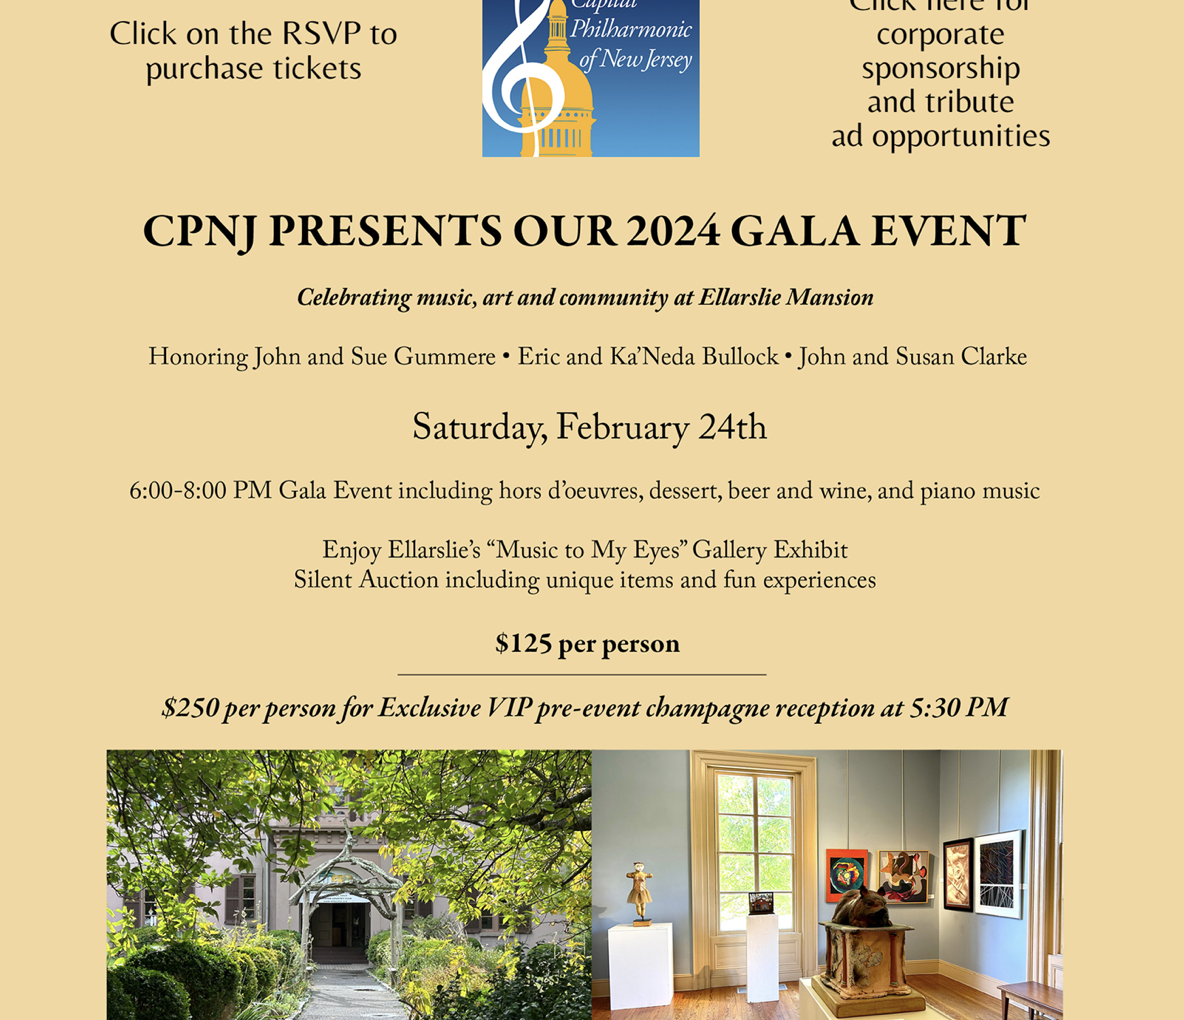 RSVP Now for The CPNJ’s 2024 Gala